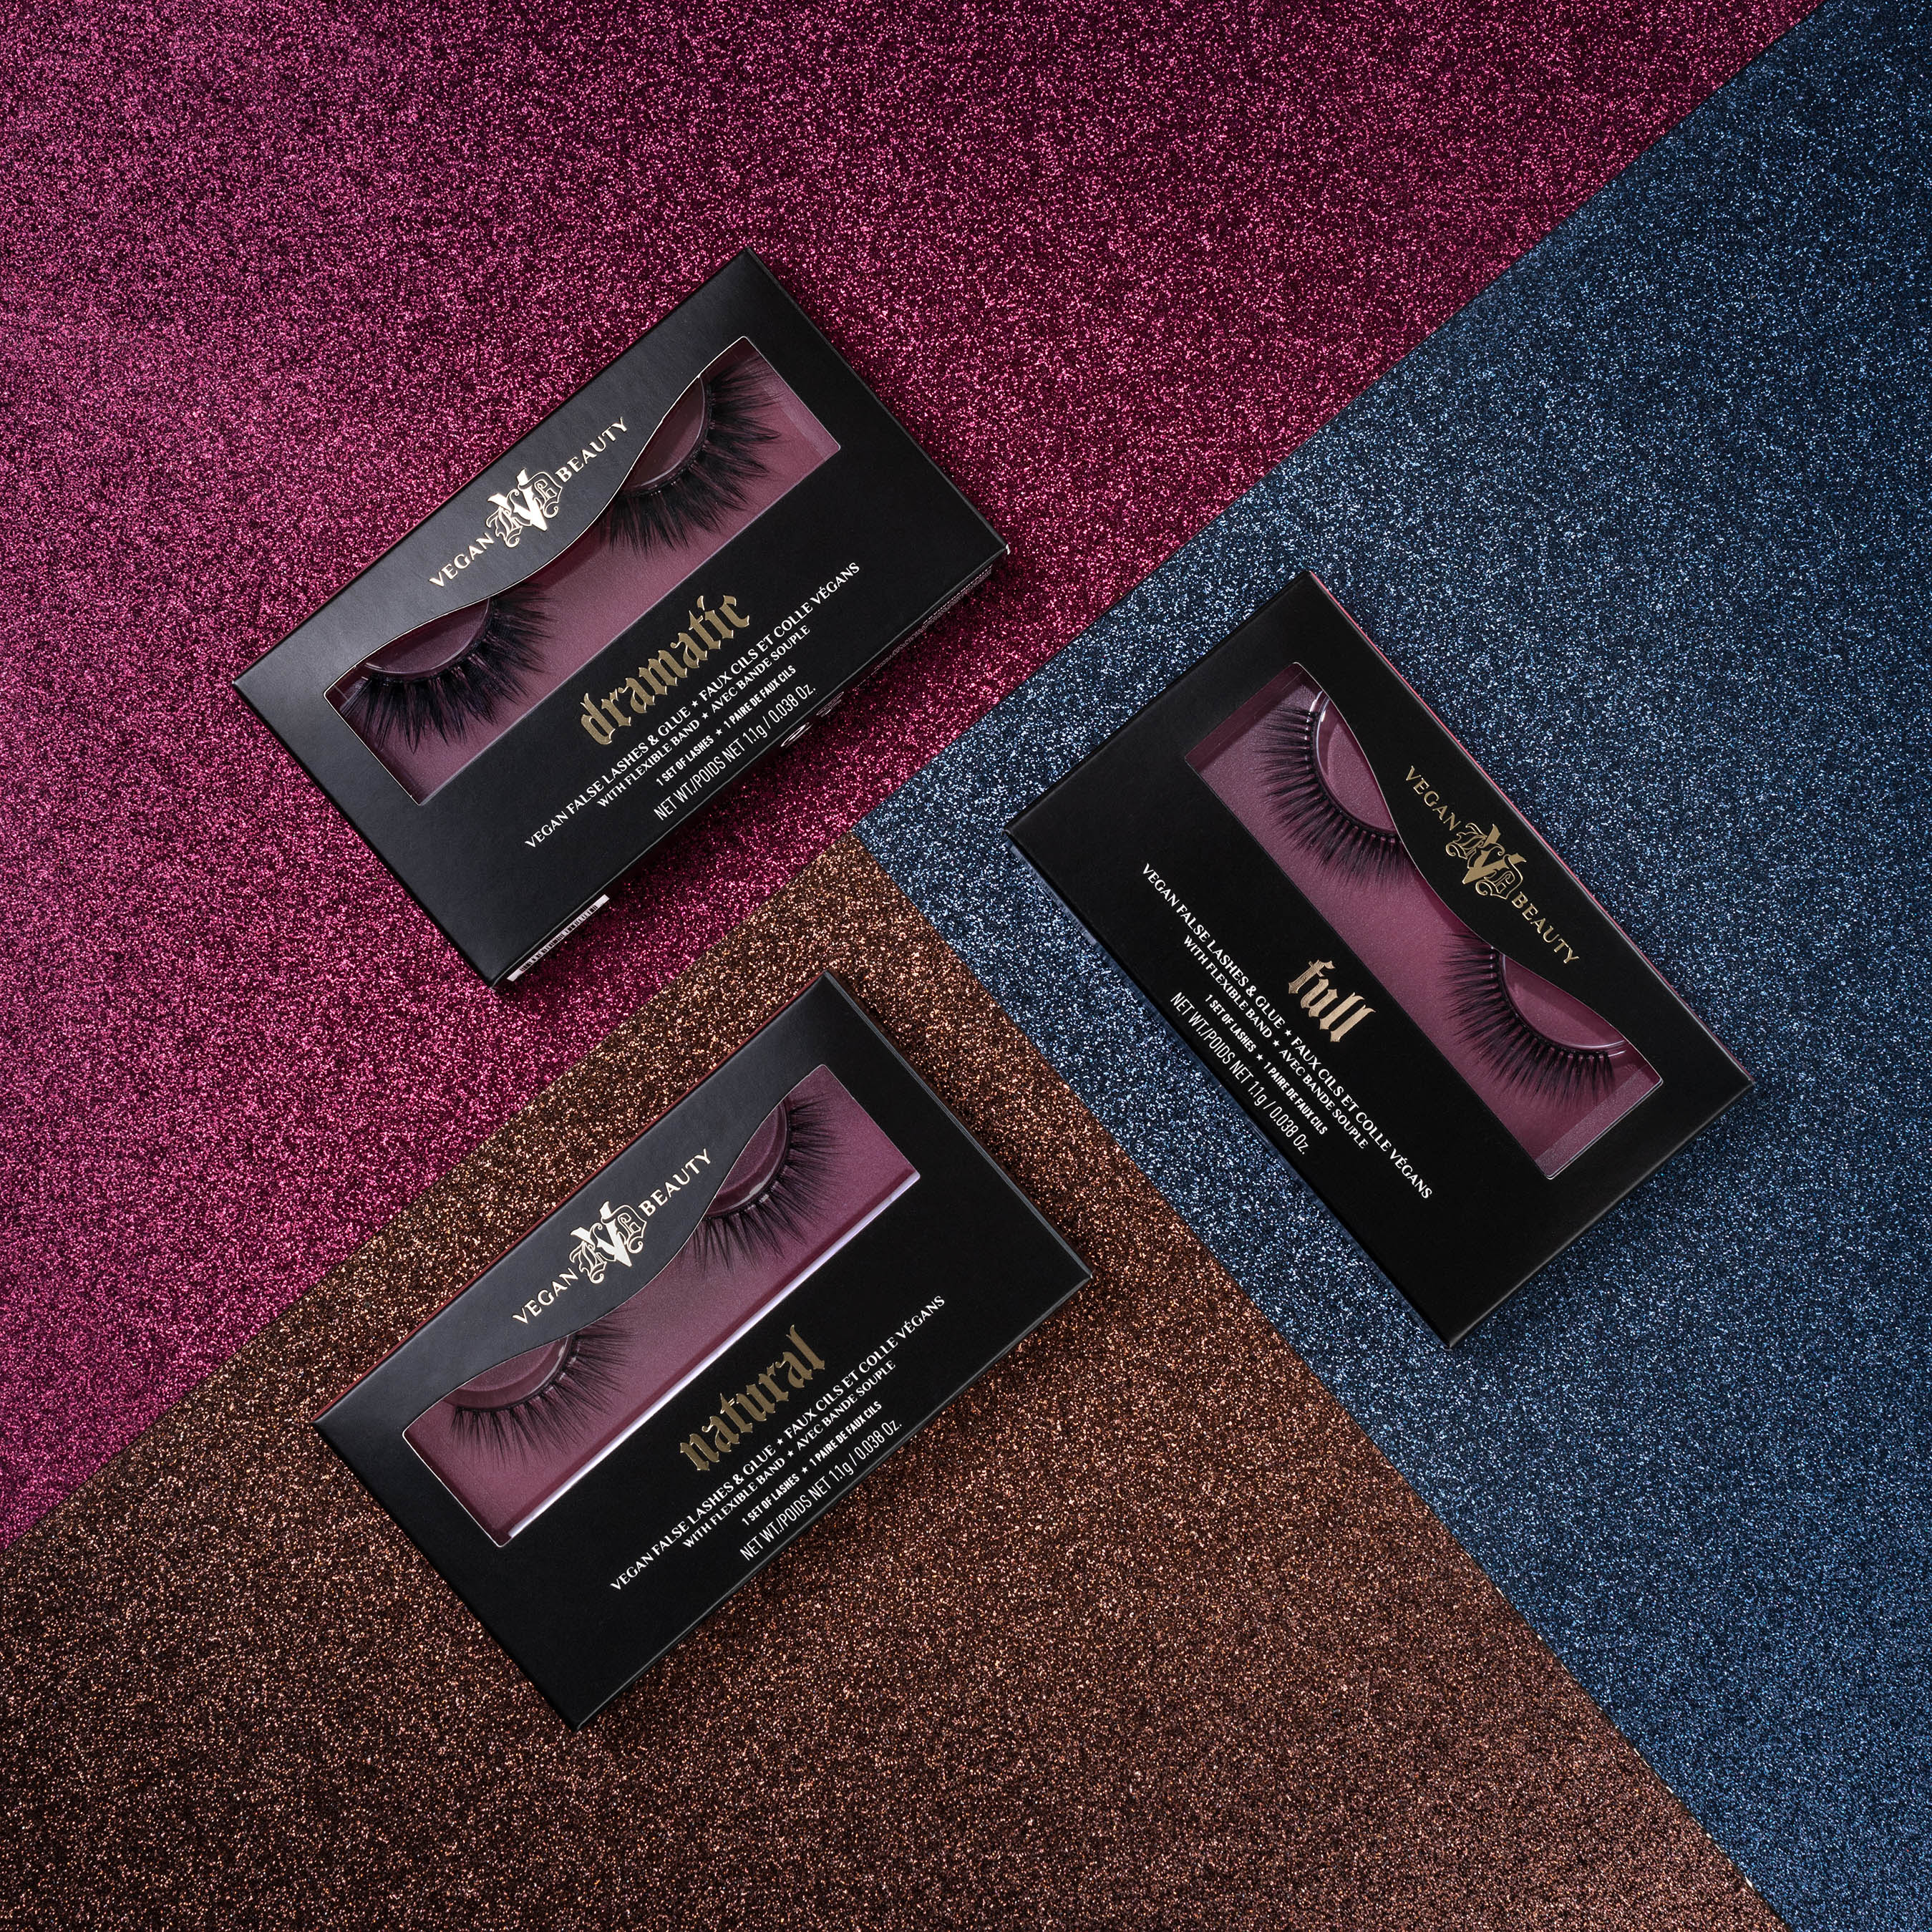 KVD Vegan Beauty Go Big or Go Home Vegan Lashes - made to fit anyone’s personal style, these falsies come in three eye-enhancing designs including Dramatic, Natural, or Full Volume.